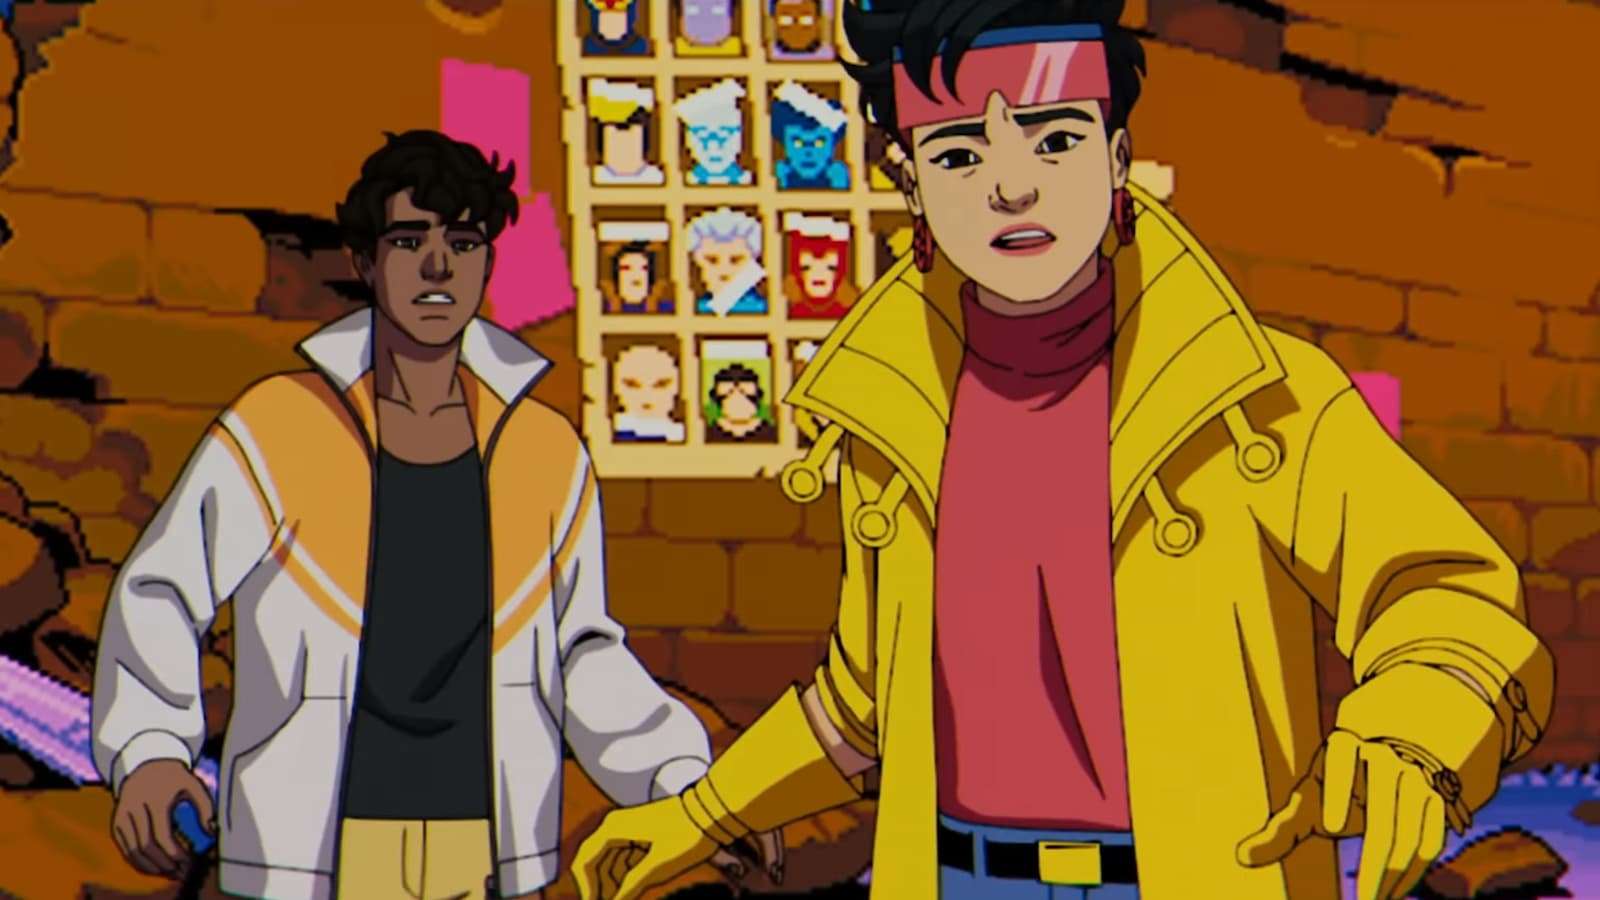 Jubilee and Sunspot X-Men '97 arcade game